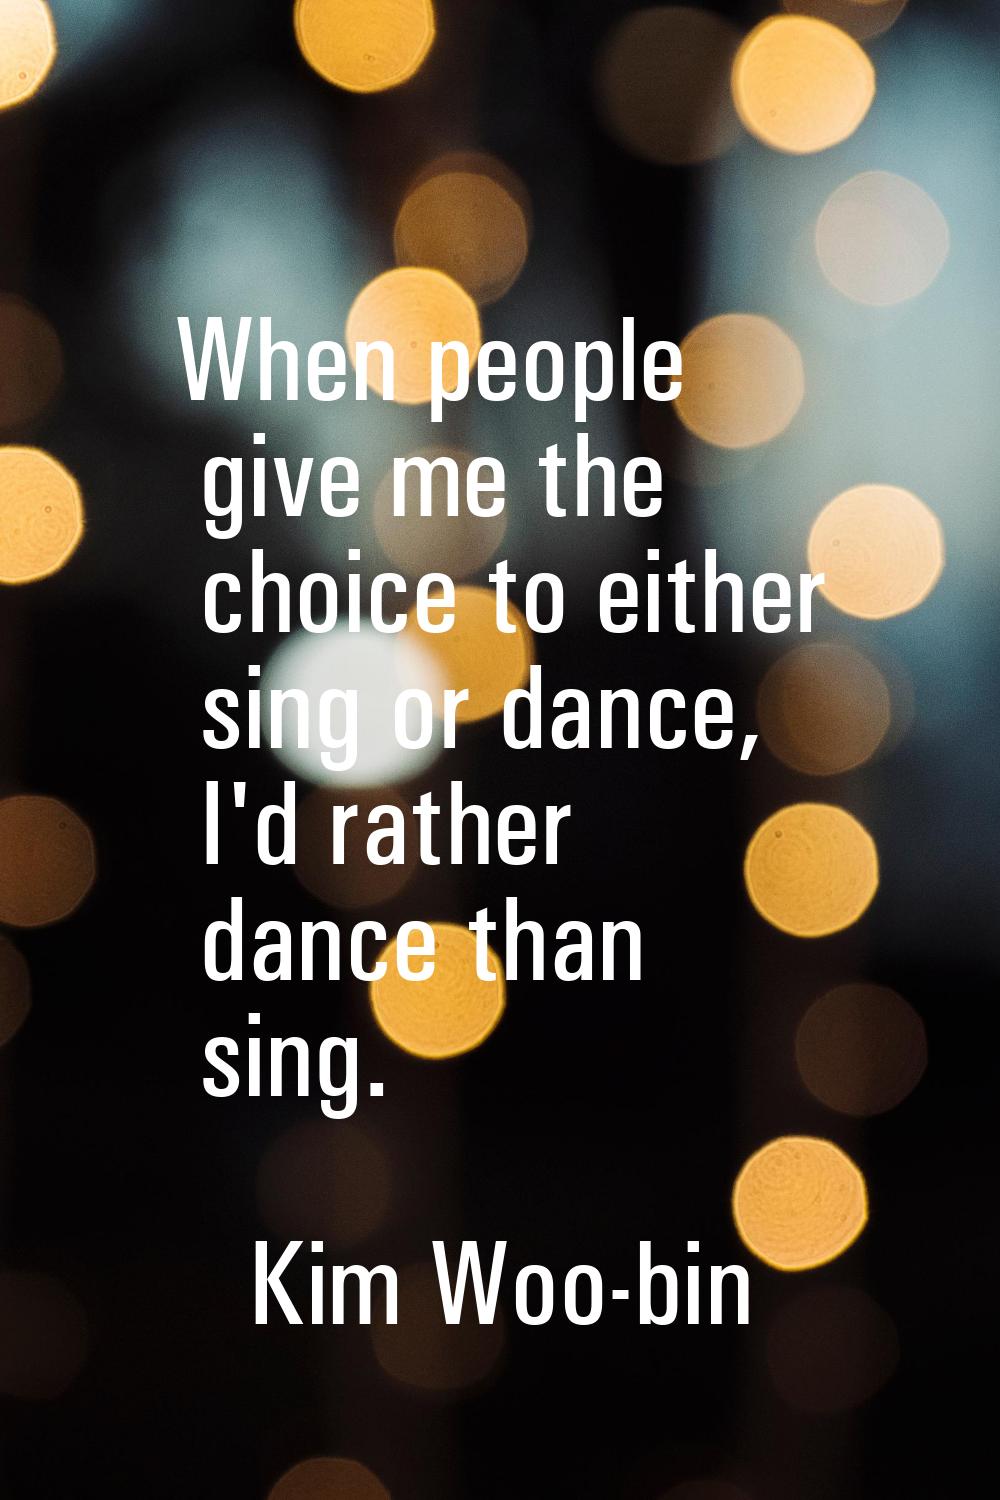 When people give me the choice to either sing or dance, I'd rather dance than sing.